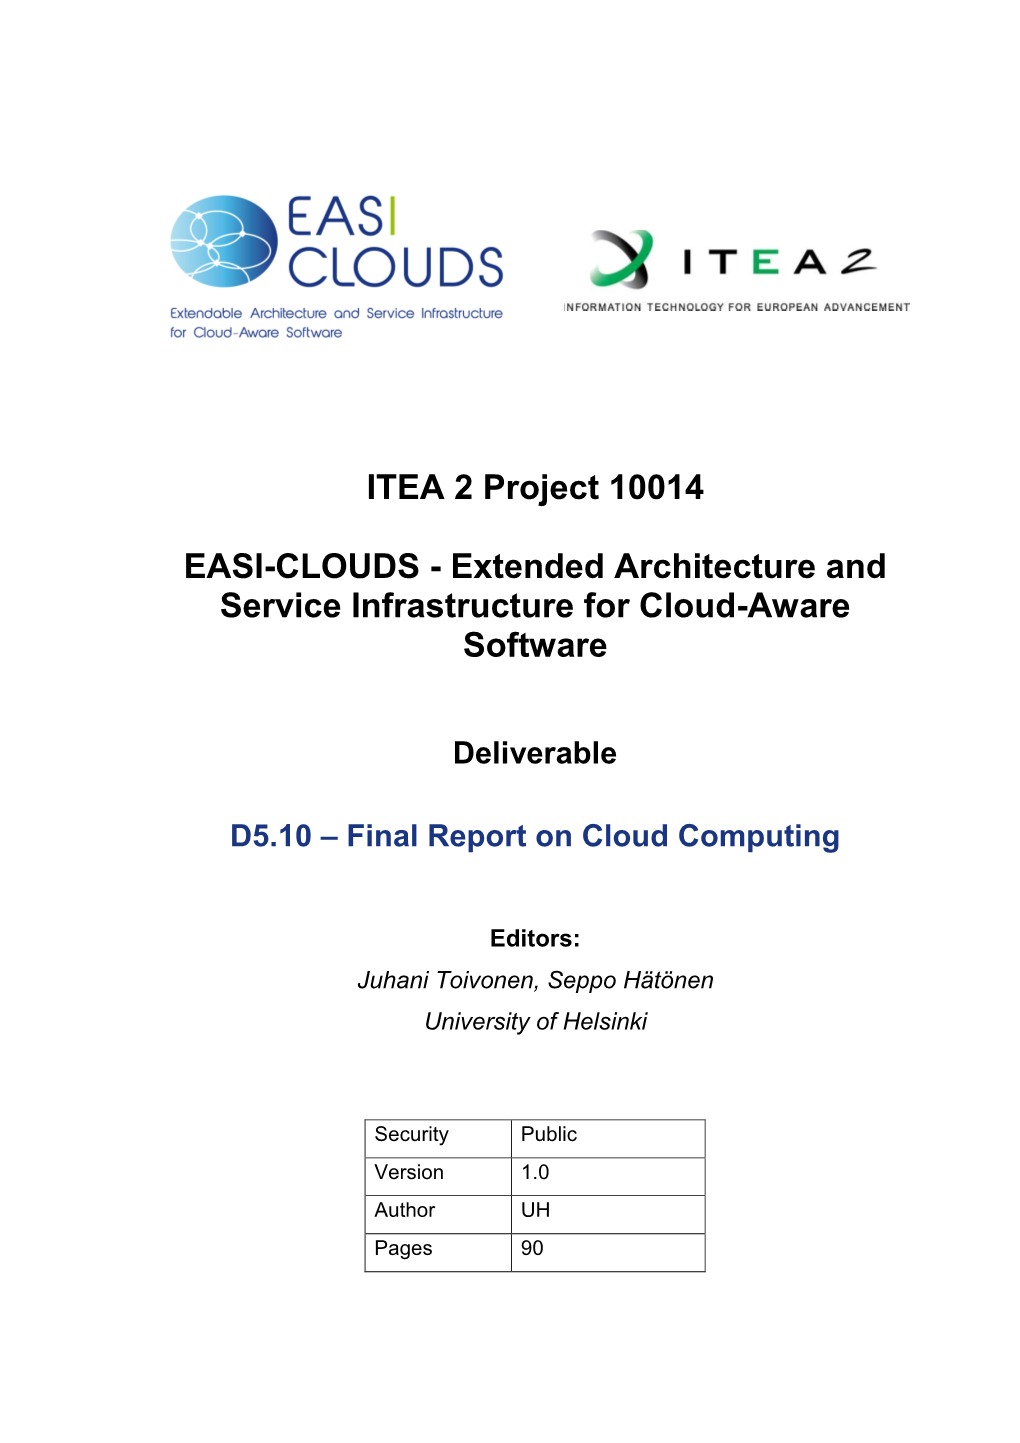 ITEA 2 Project 10014 EASI-CLOUDS